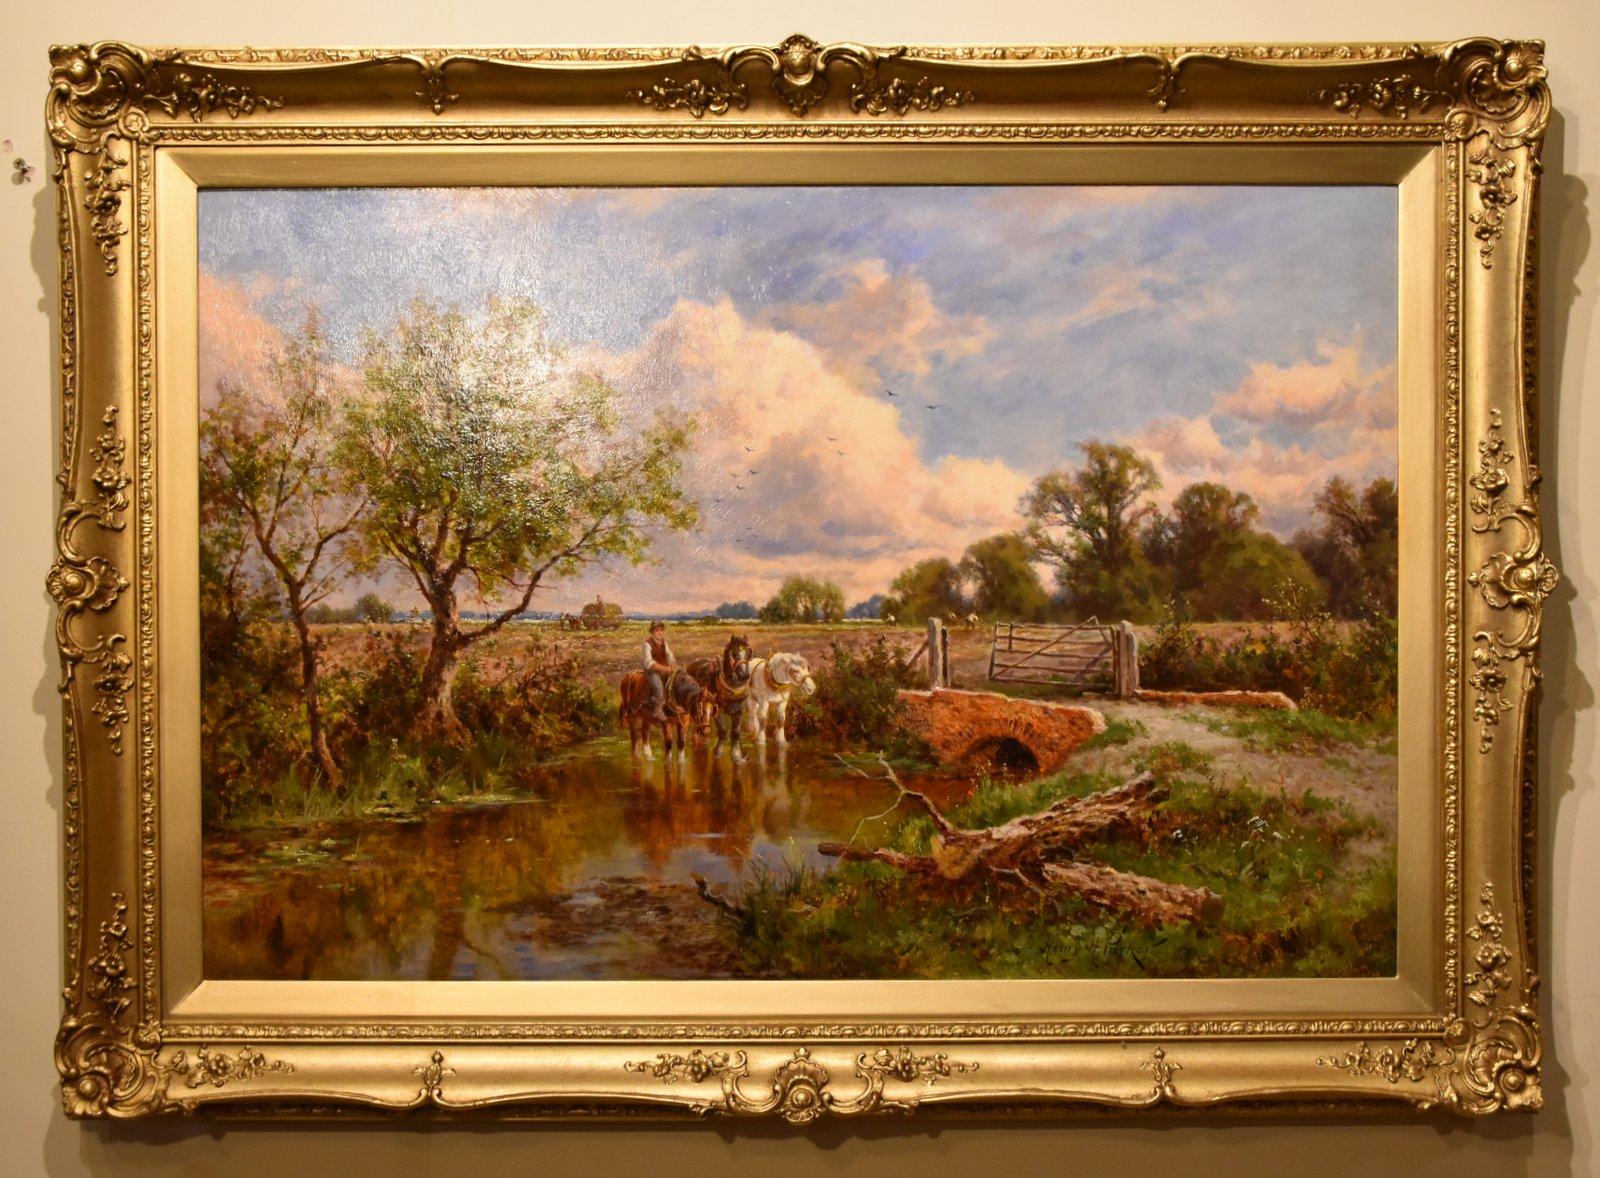 Oil Painting by Henry Hiller Parker  "Watering the Horses" flourished 1858- 1930 Home counties painter of tranquil rural landscapes studied at St. Martins School of Art and Royal Acsdemy schoolsExhibited in Canada and the states and worked for the